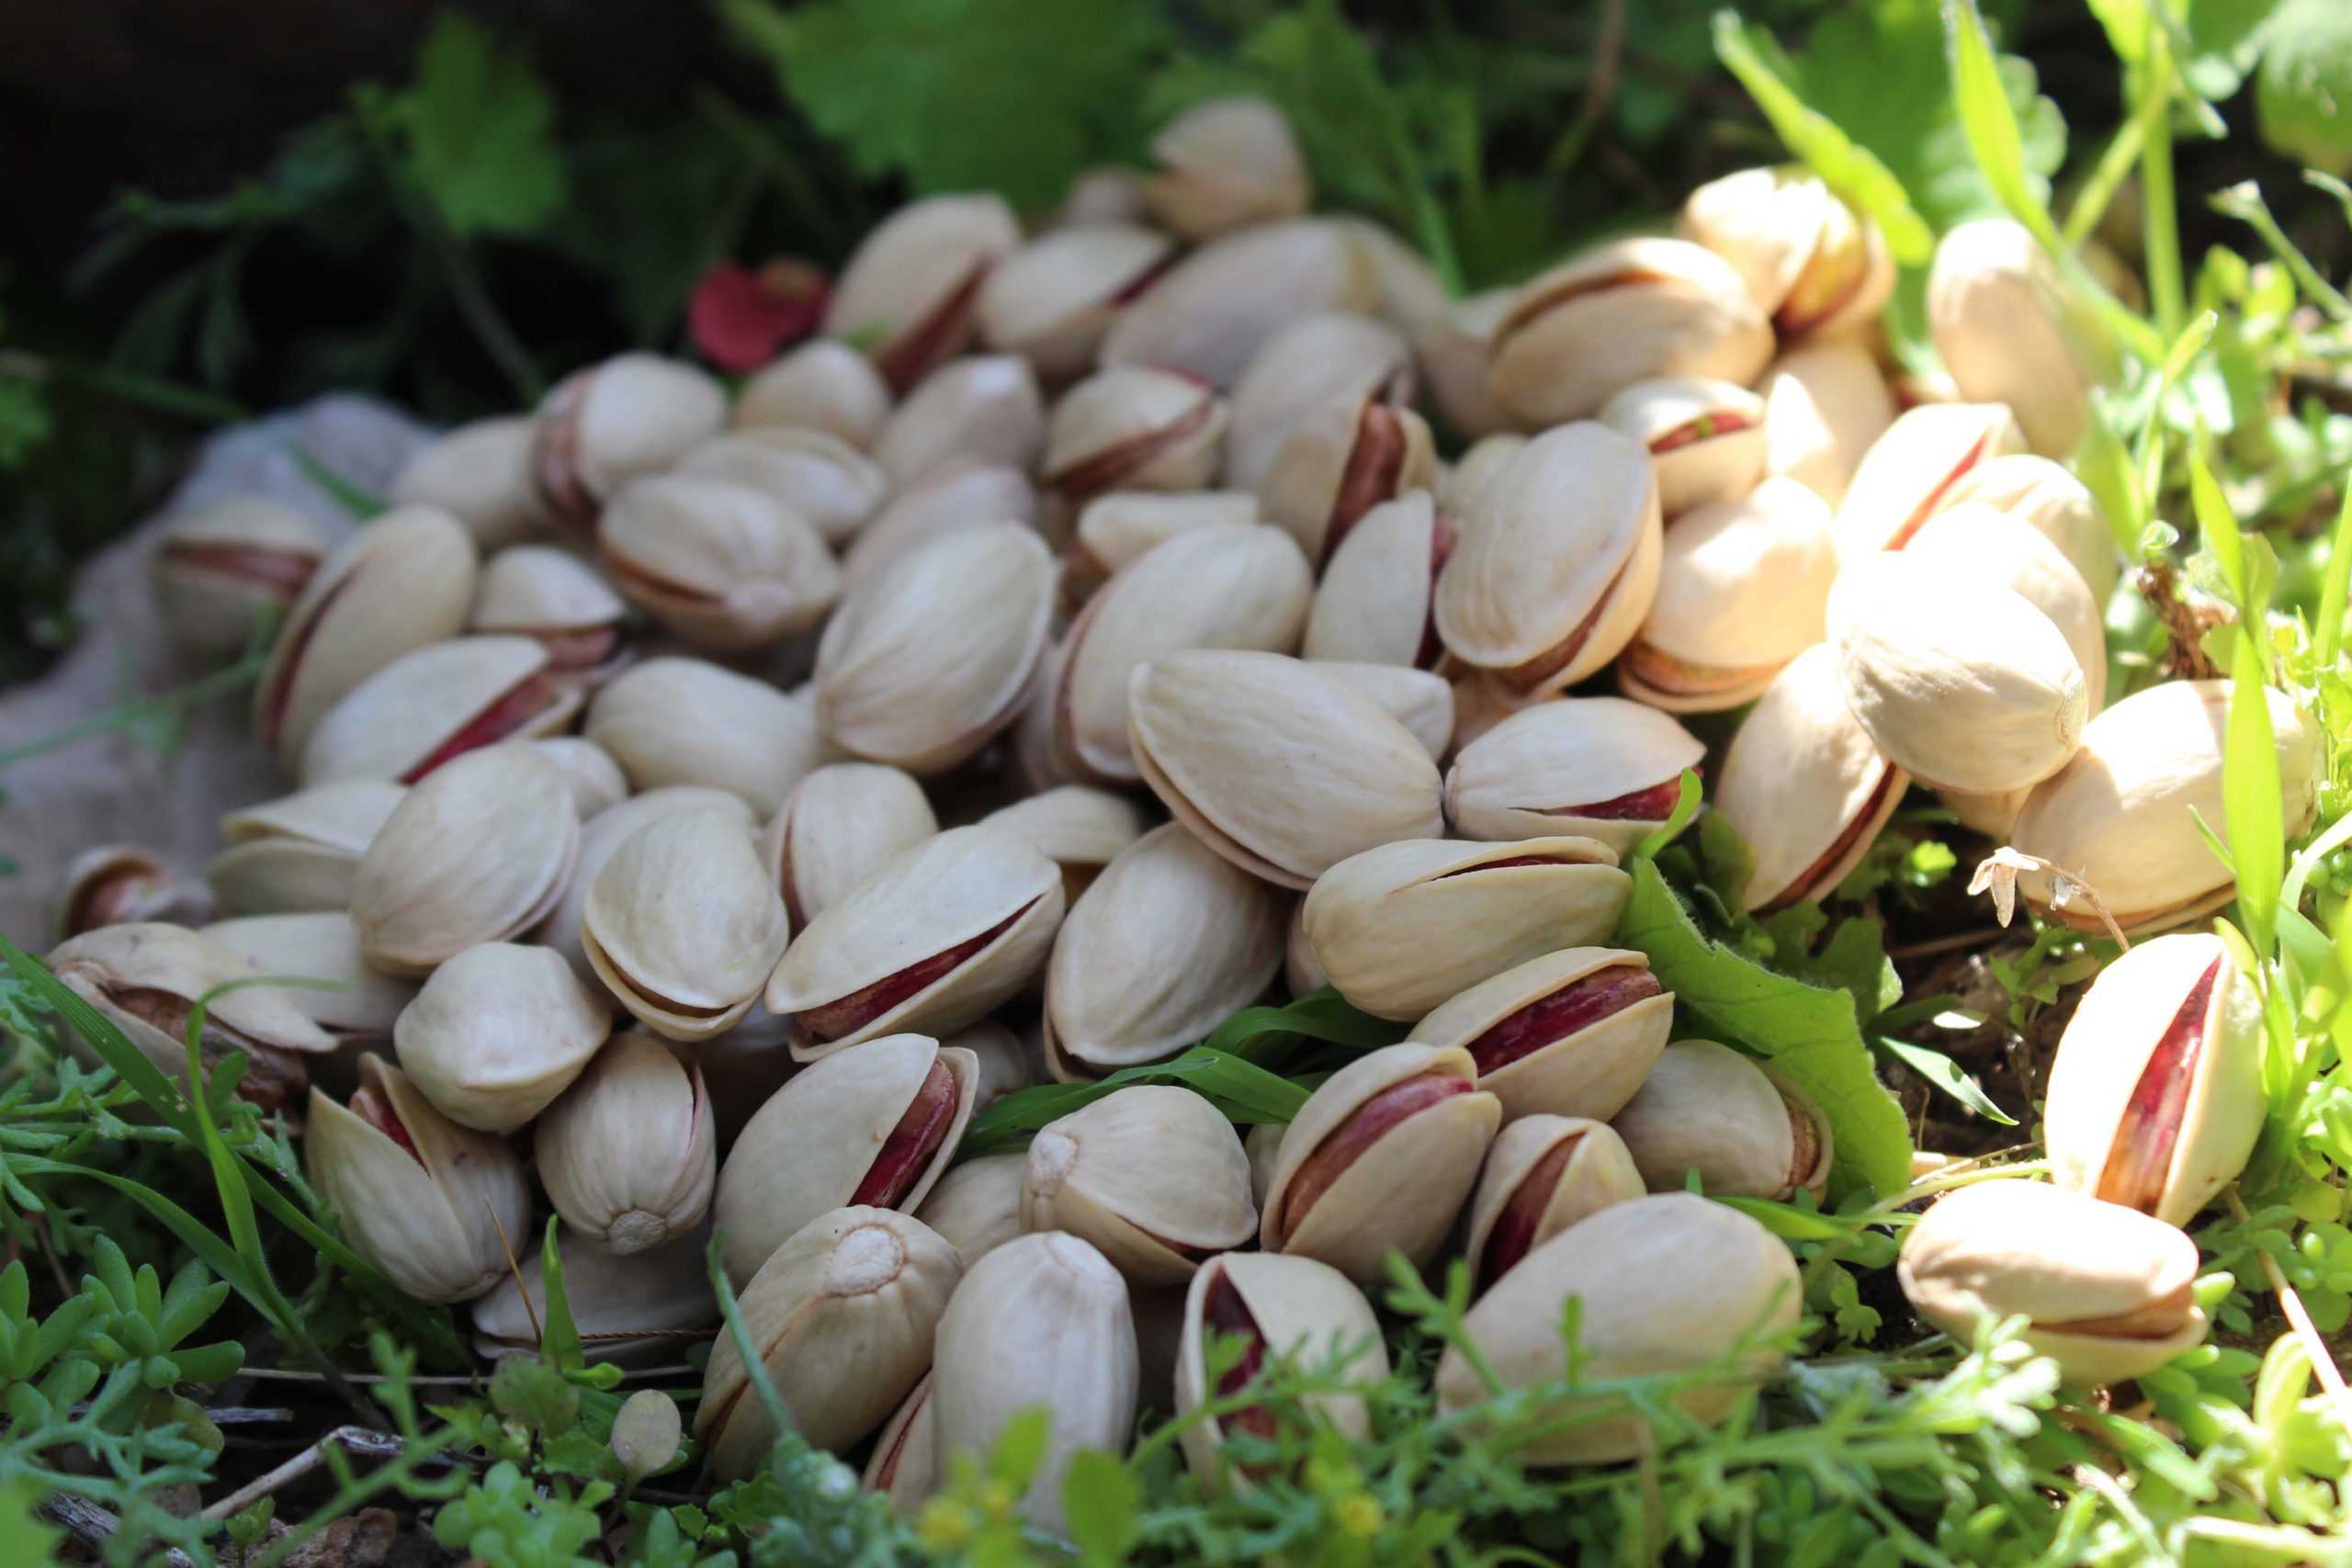 How to export iran’s pistachios to Ukraine - Italy - Britain and Spain